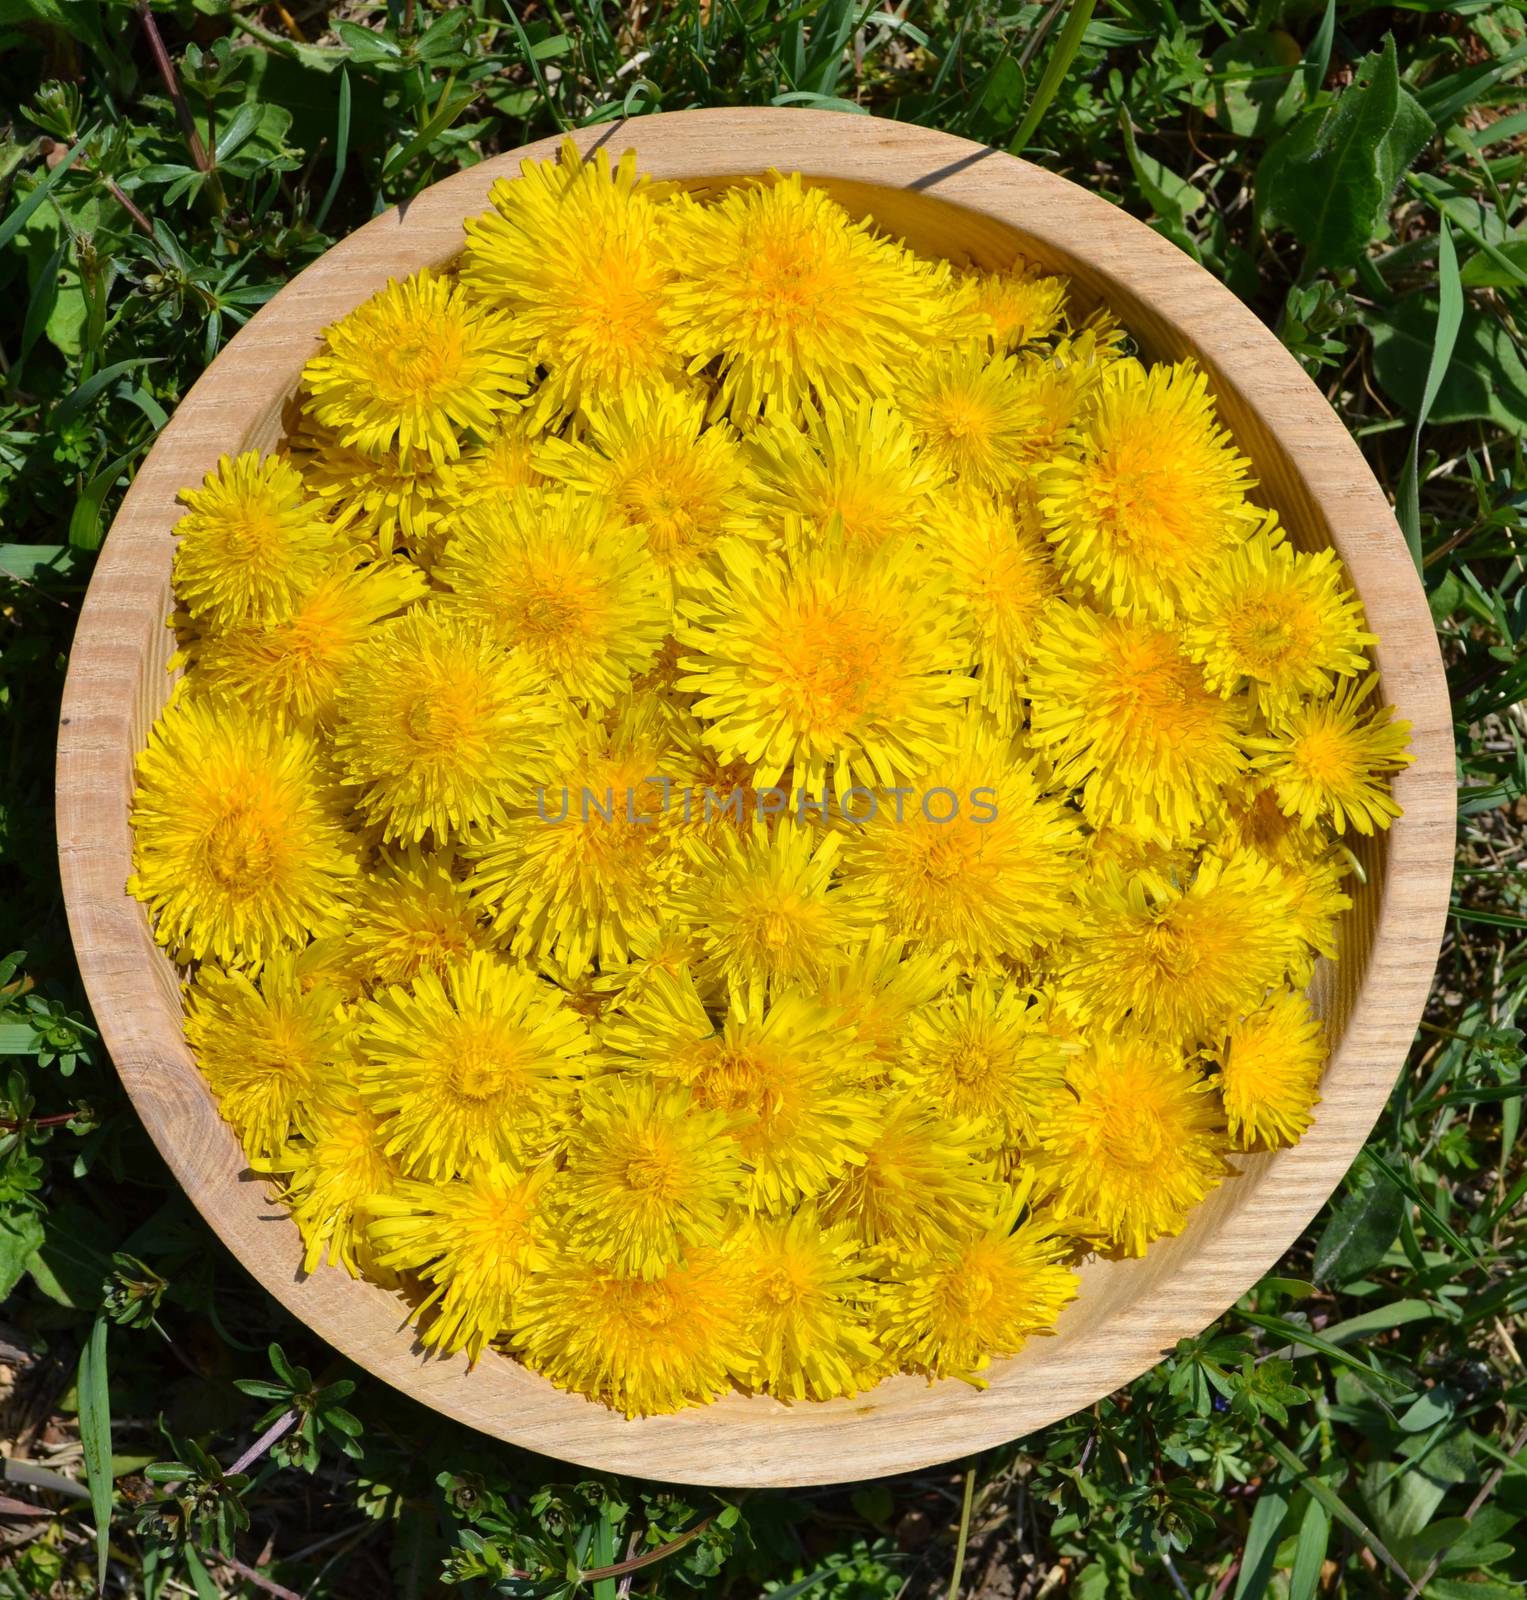 Lot of Taraxacum officinale flowers in a wooden bowl on the gras by hibrida13